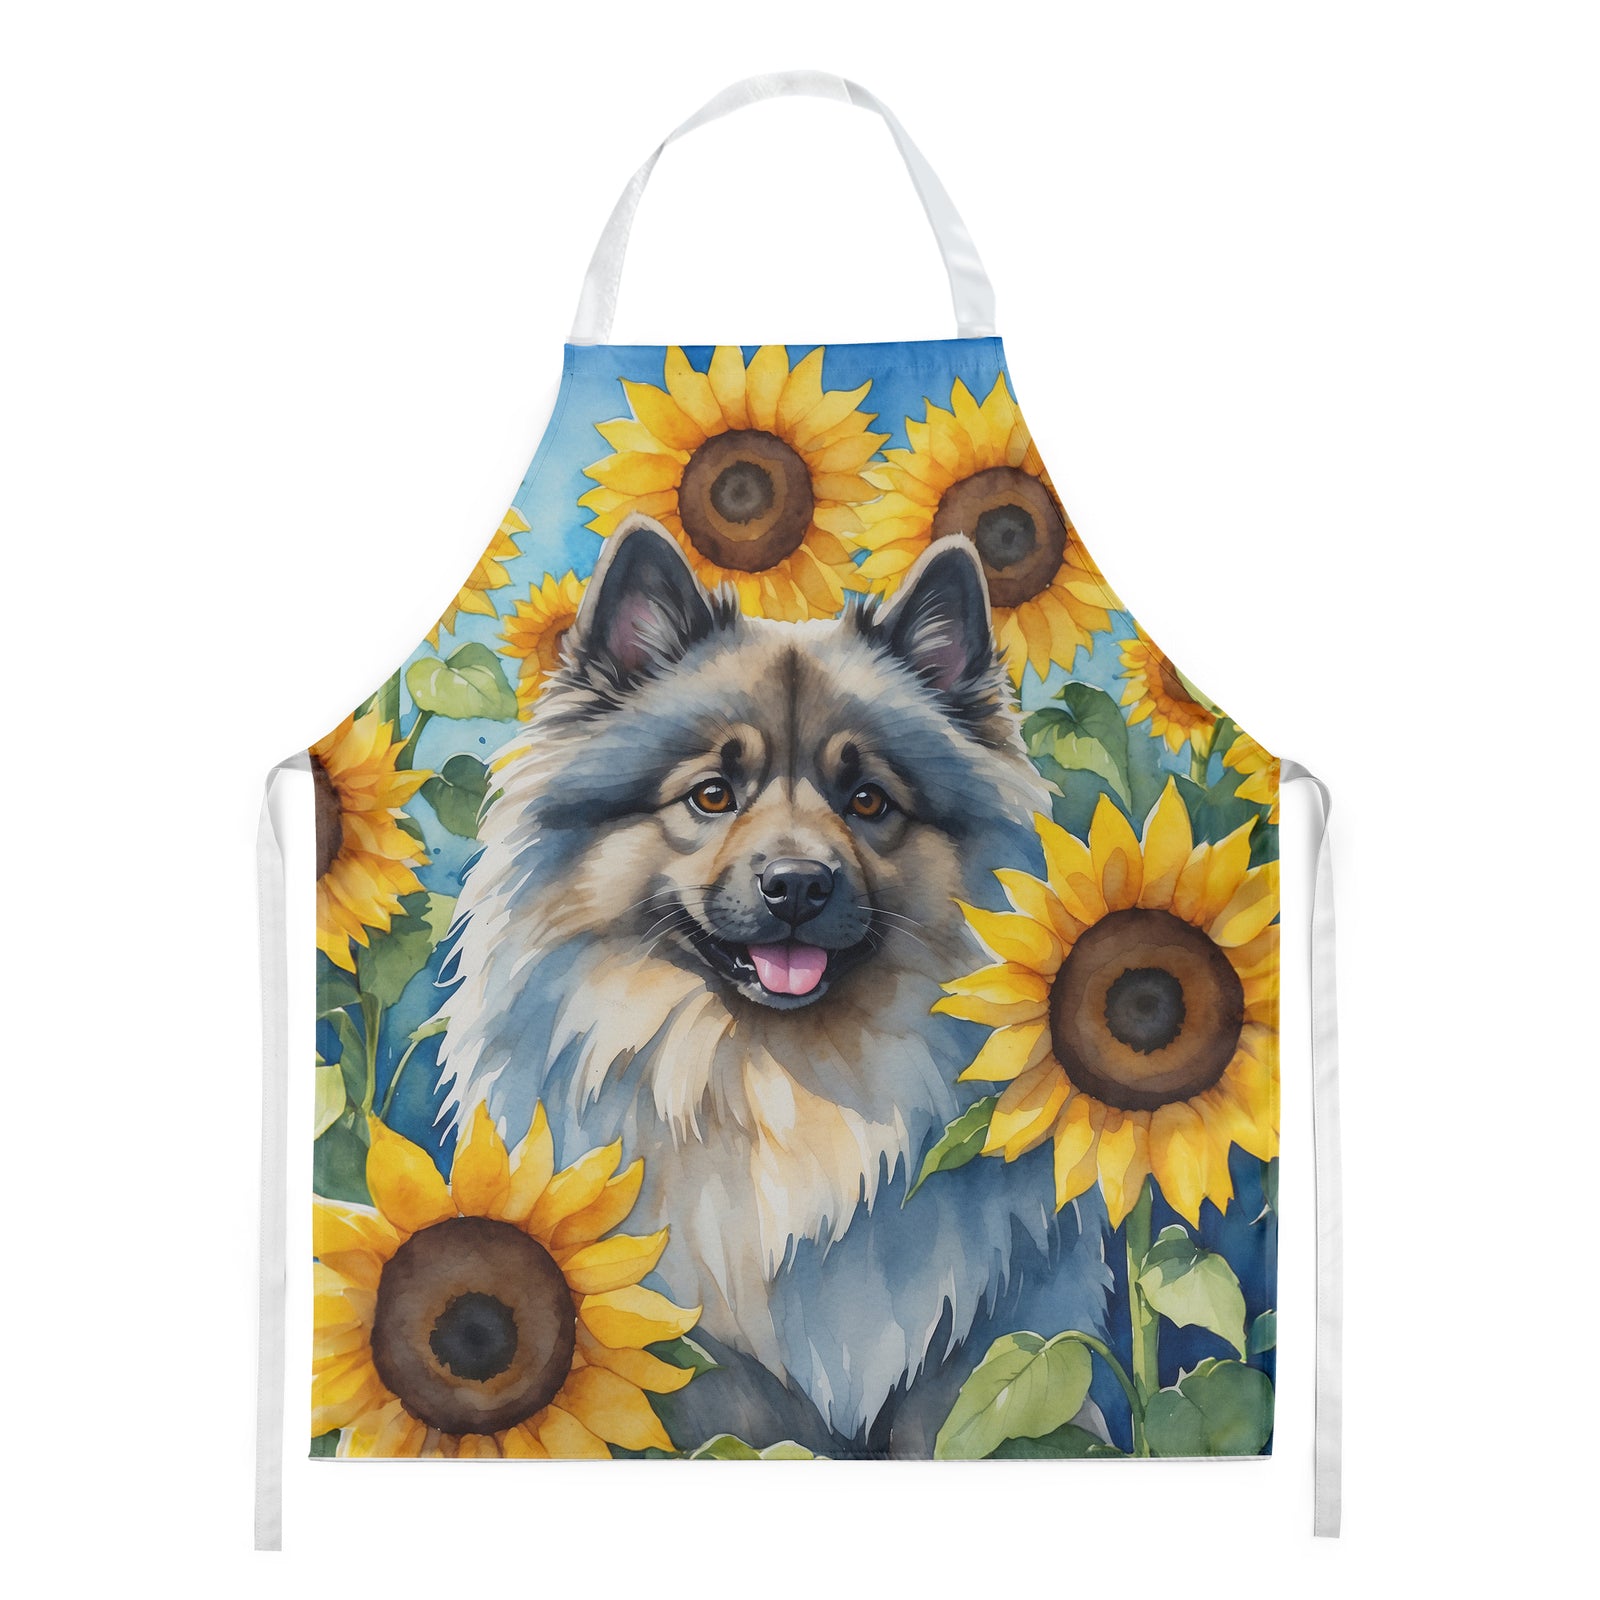 Buy this Keeshond in Sunflowers Apron